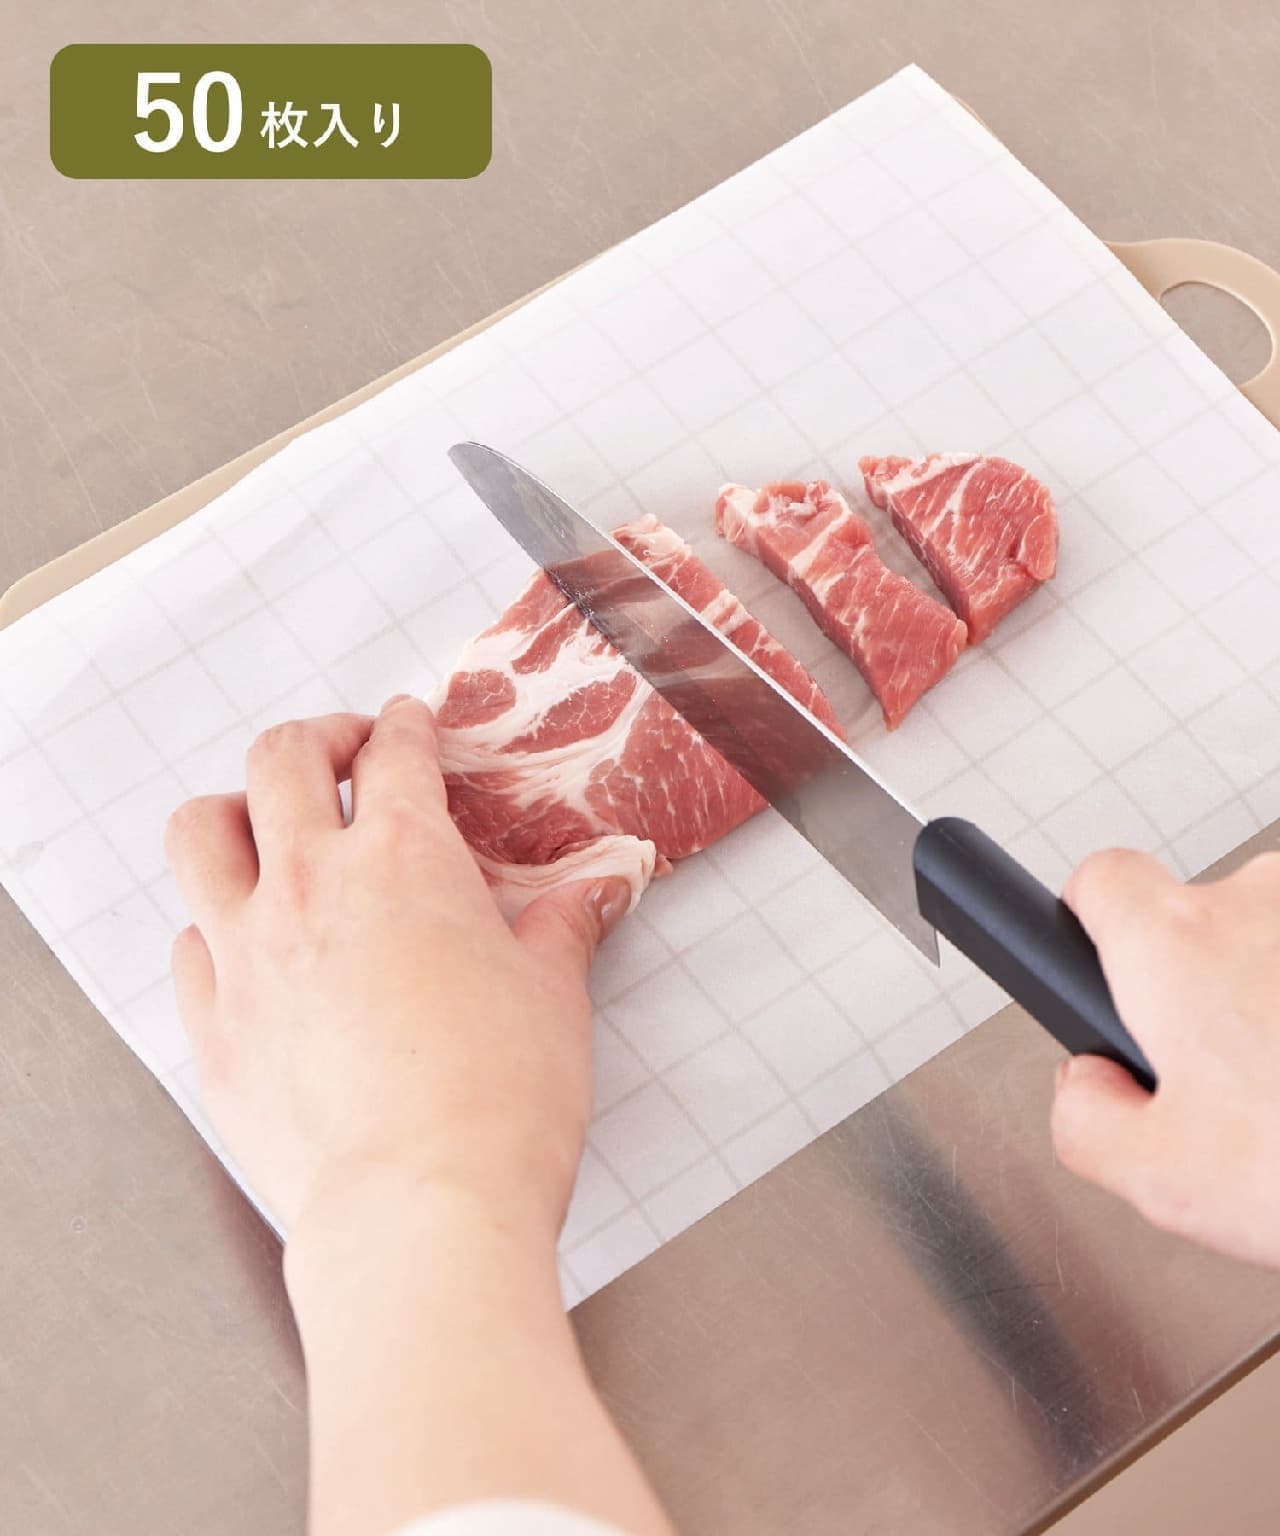 Stain-proof cutting board sheets (50 sheets)